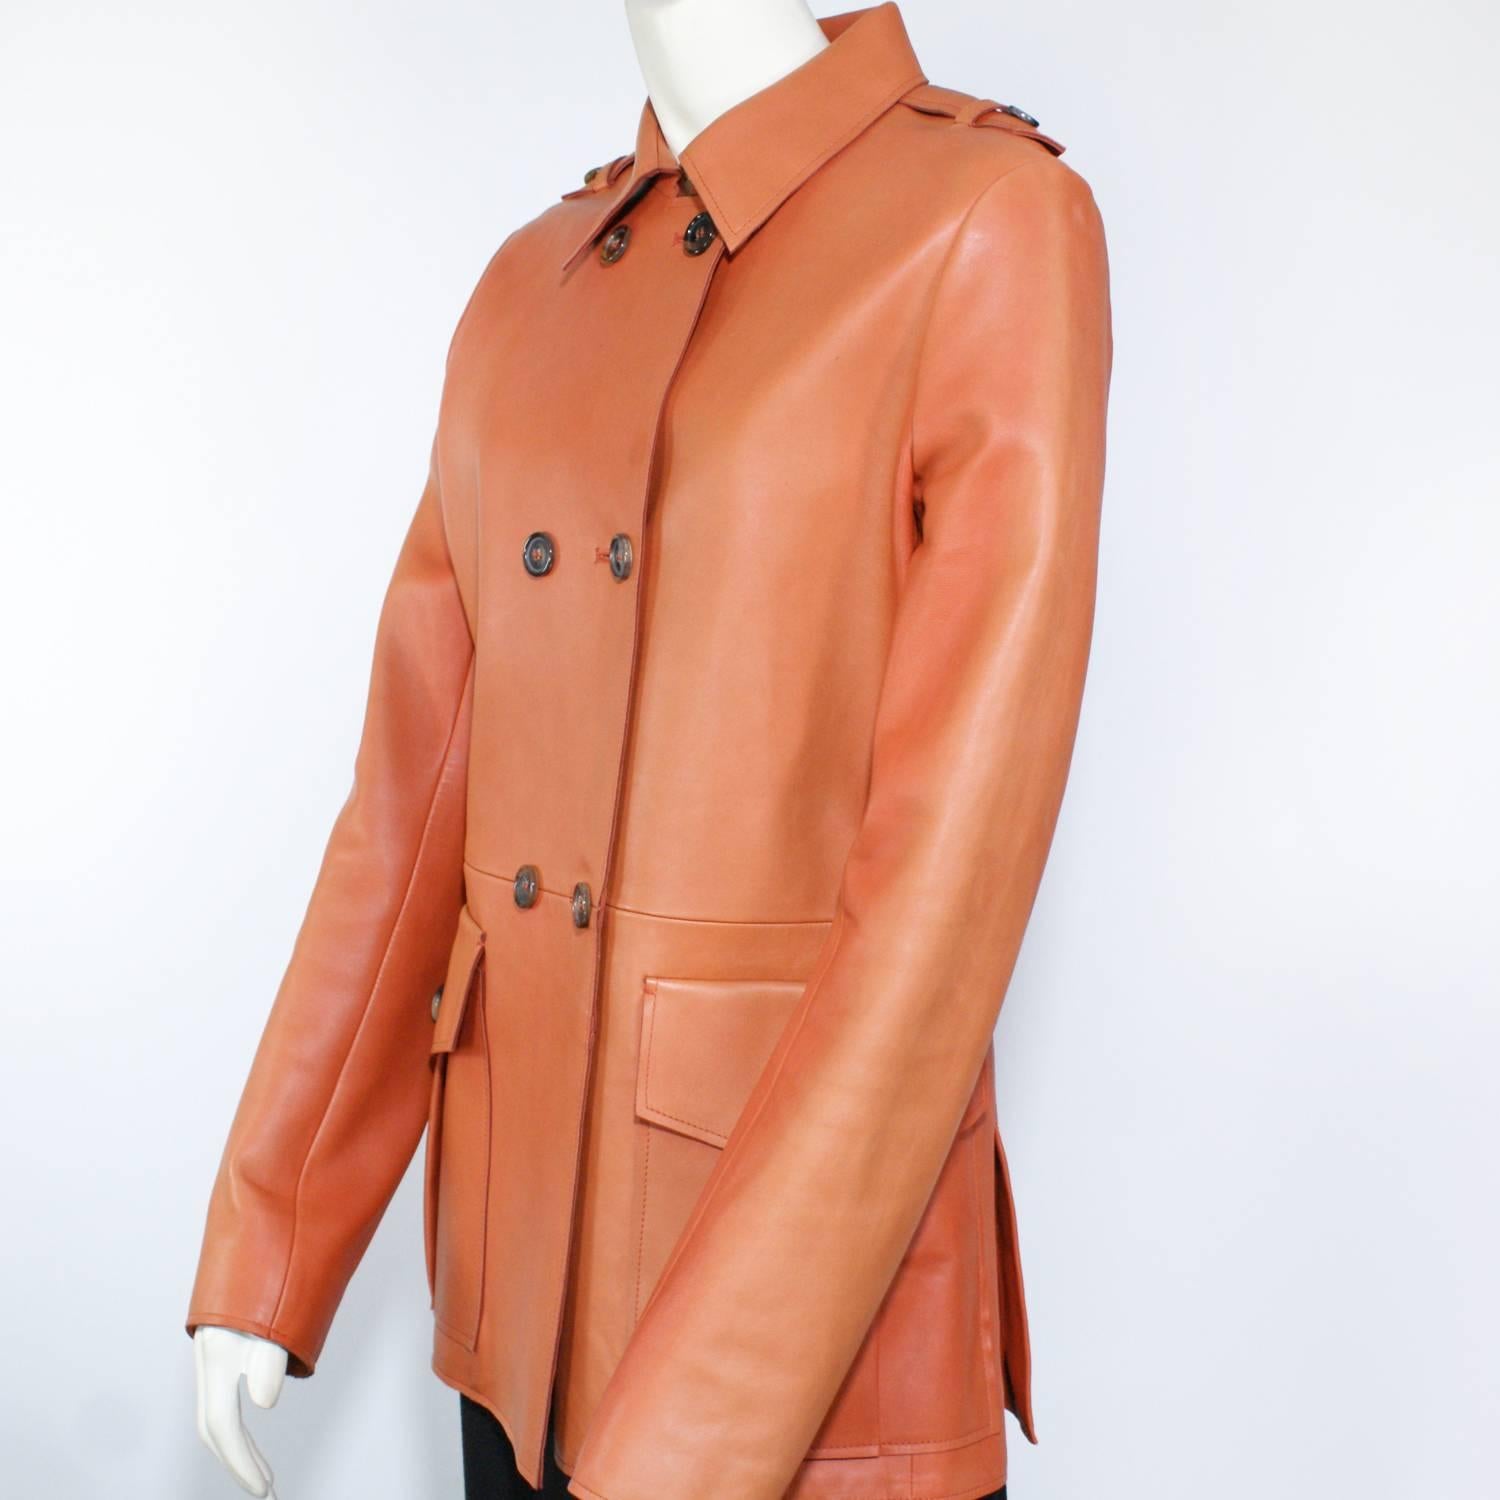 Brown tortoise buttons
Clasp at the neckline
Two front pockets
Orange Leather
Fully lined
Fits like a Medium
